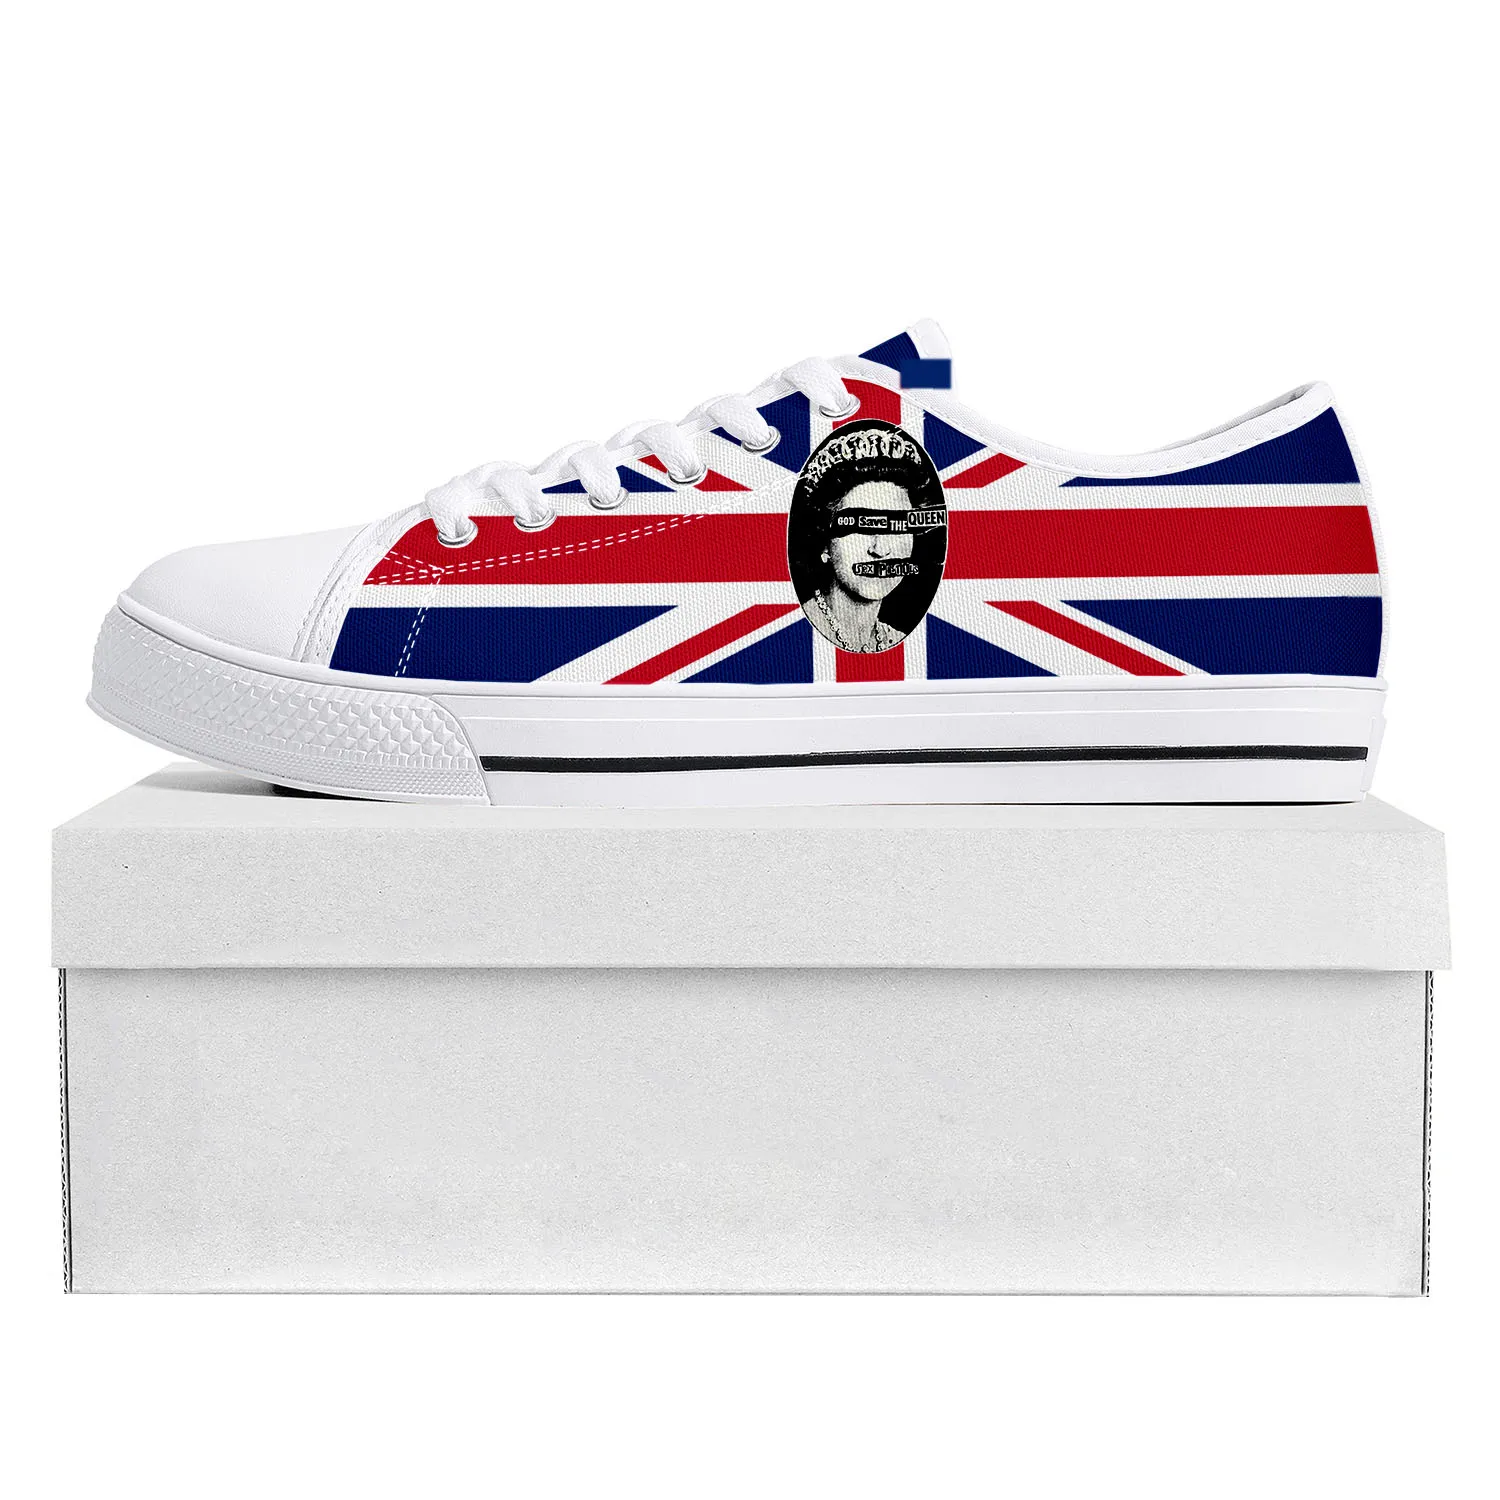 

Sex Pistols Low Top Sneakers Mens Womens Teenager Canvas High Quality Sneaker Casual God Save The Queen Customize DIY White Shoe